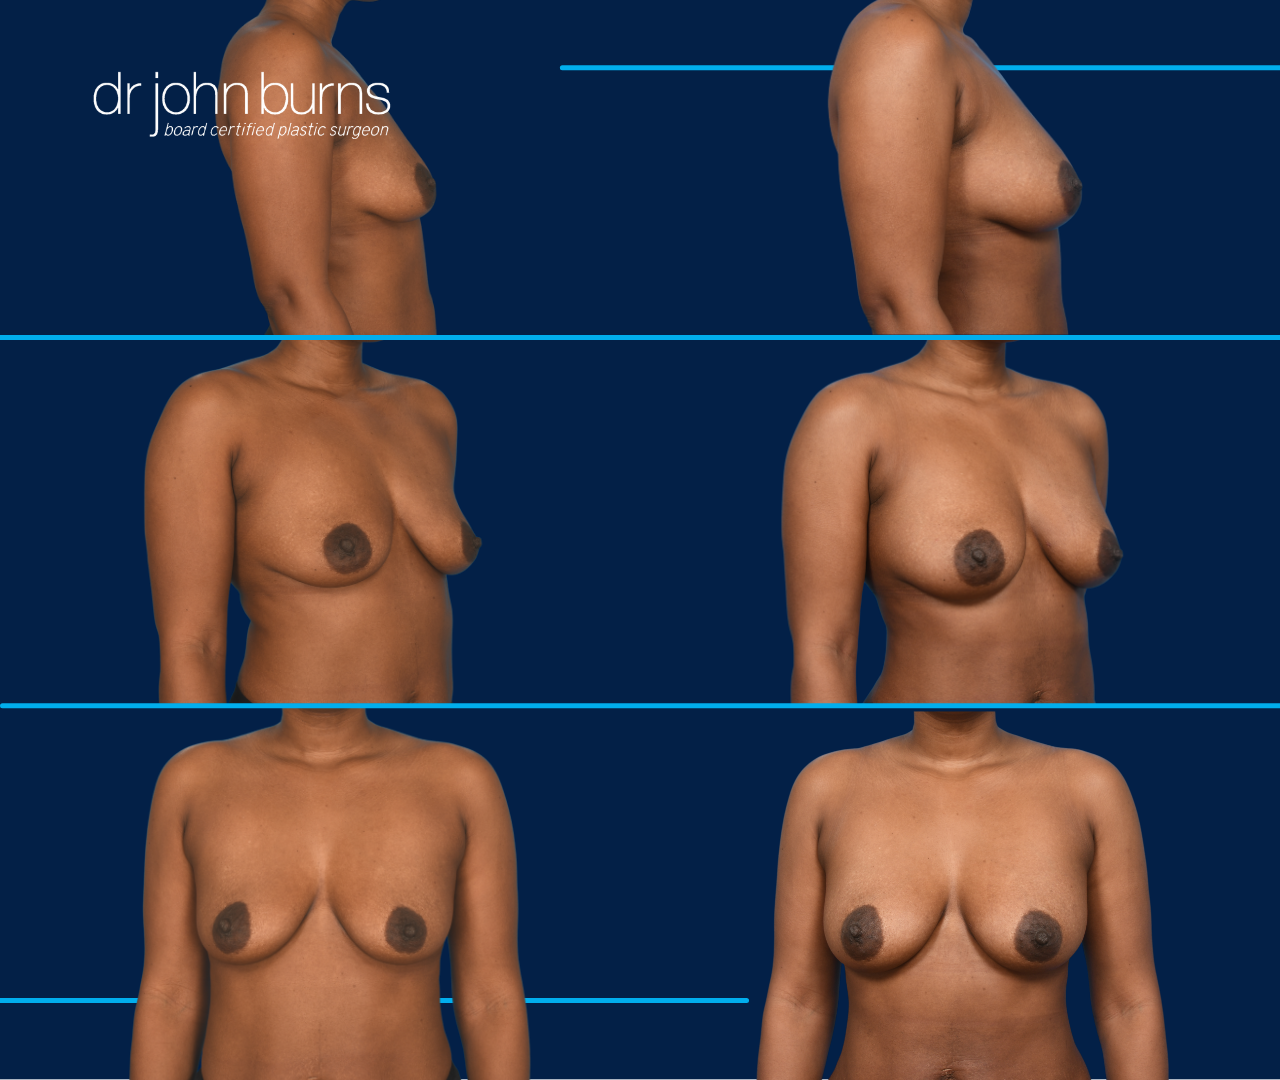 case 11- before and after breast augmentation fat transfer by top plastic surgeon, Dr. John Burns